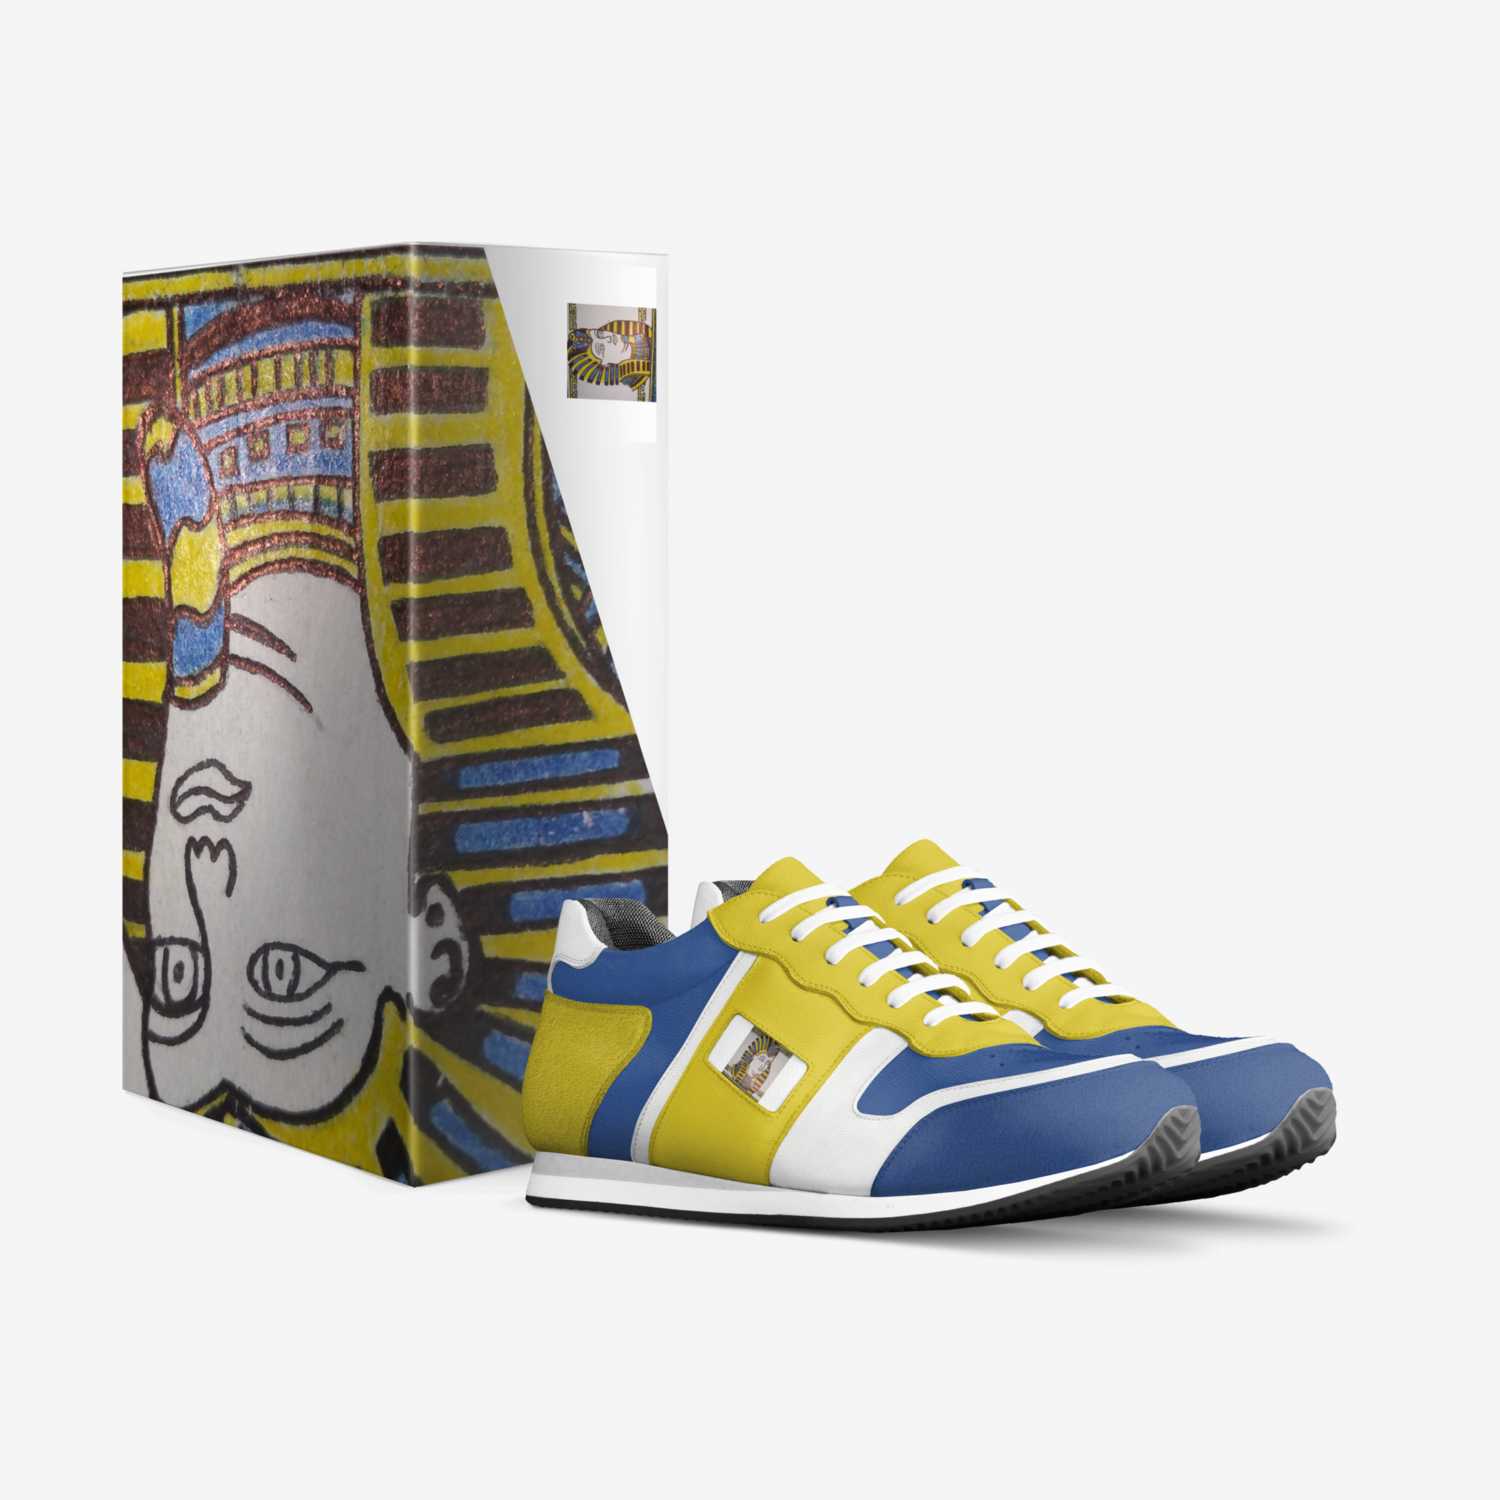 King In Designer custom made in Italy shoes by Eric Russell | Box view